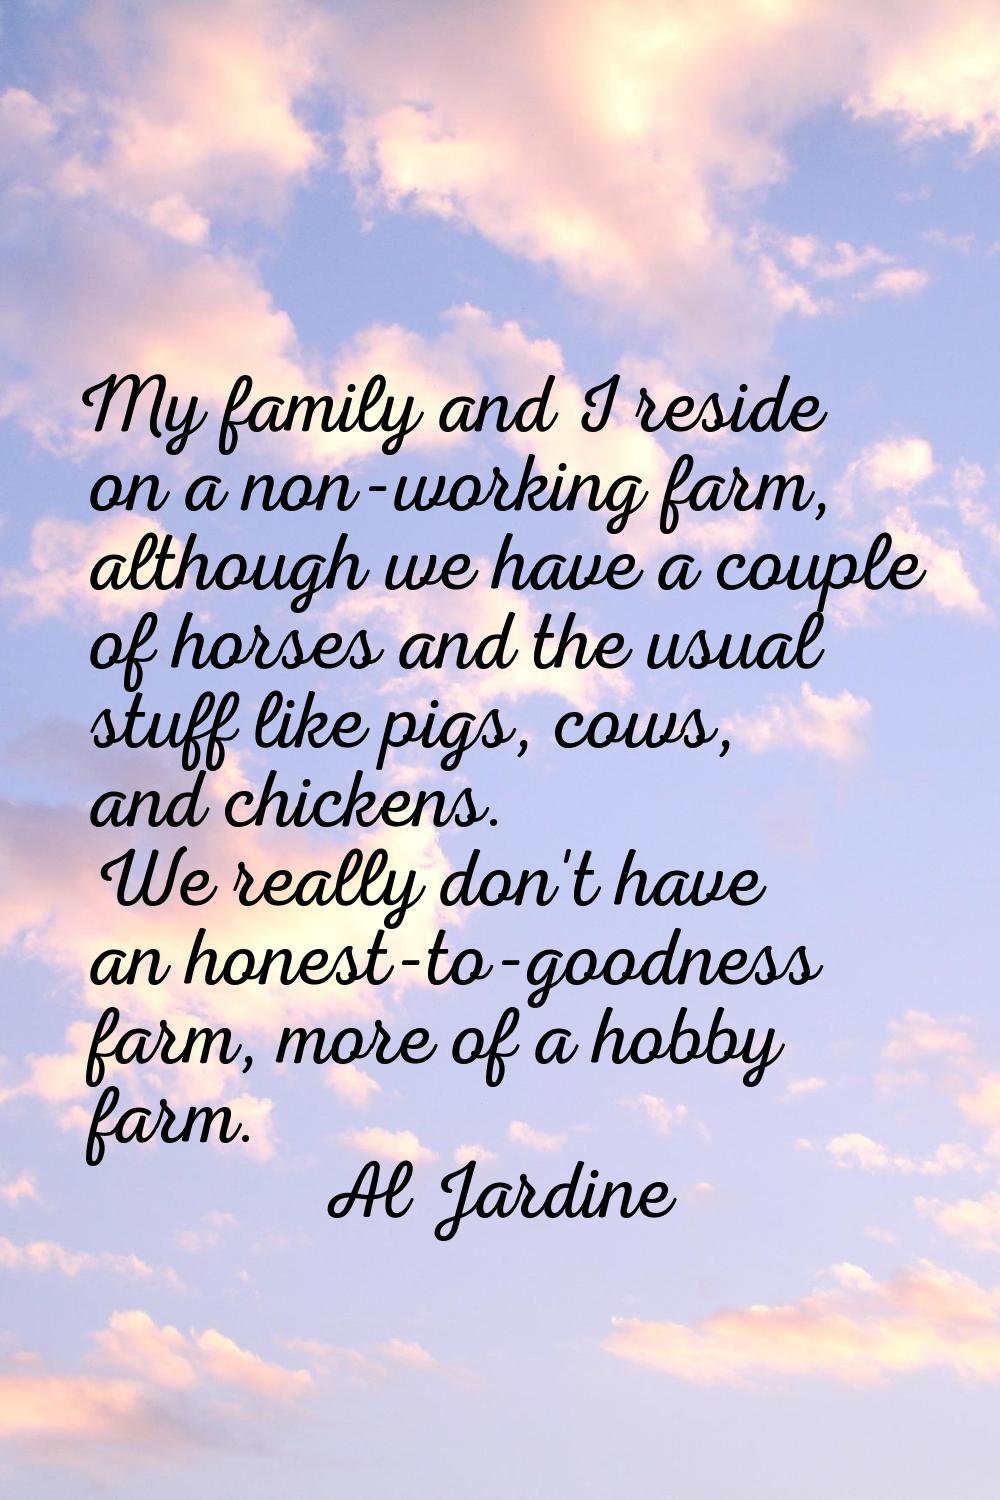 My family and I reside on a non-working farm, although we have a couple of horses and the usual stu